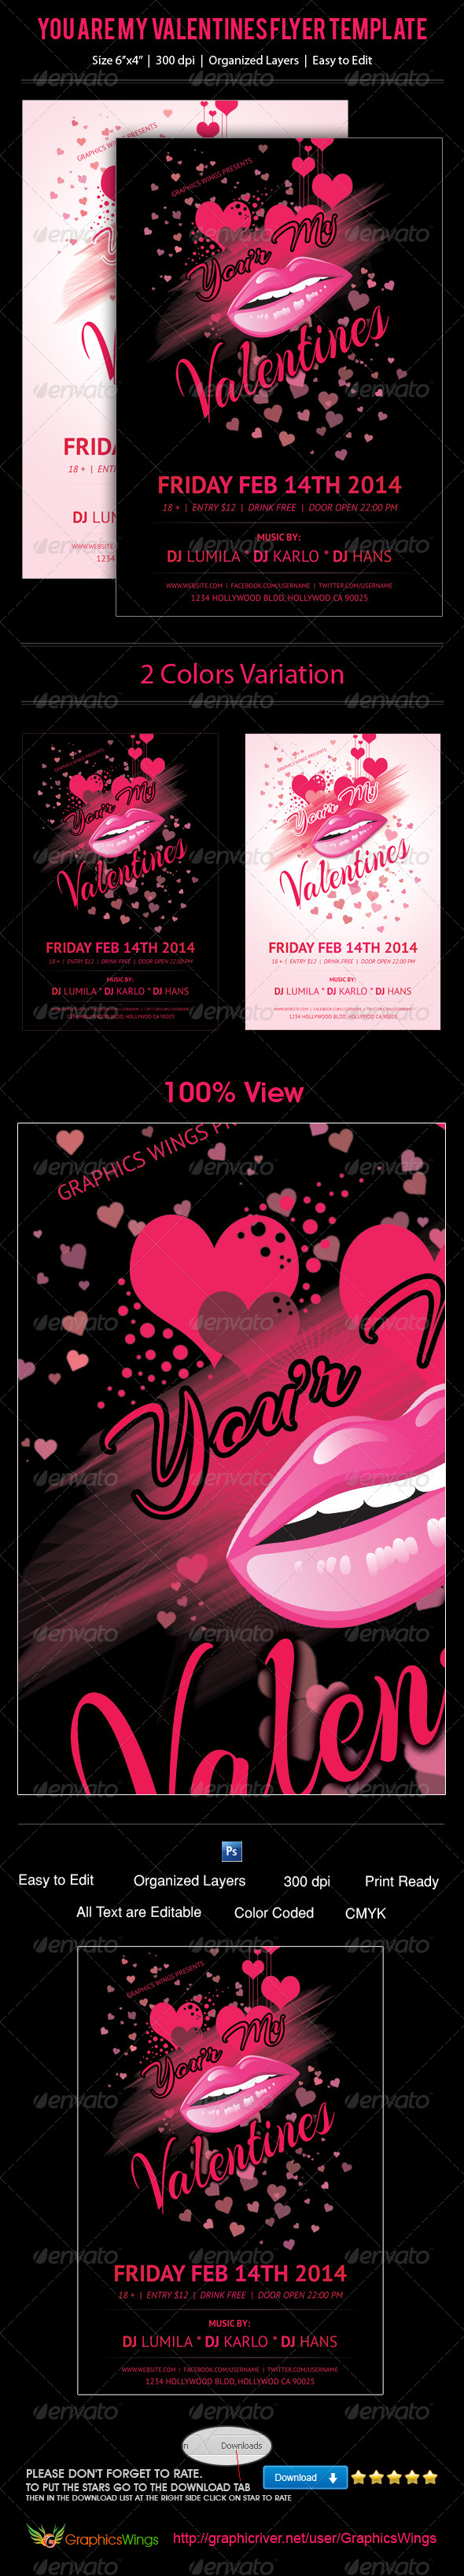 You Are My Valentines Flyer Template